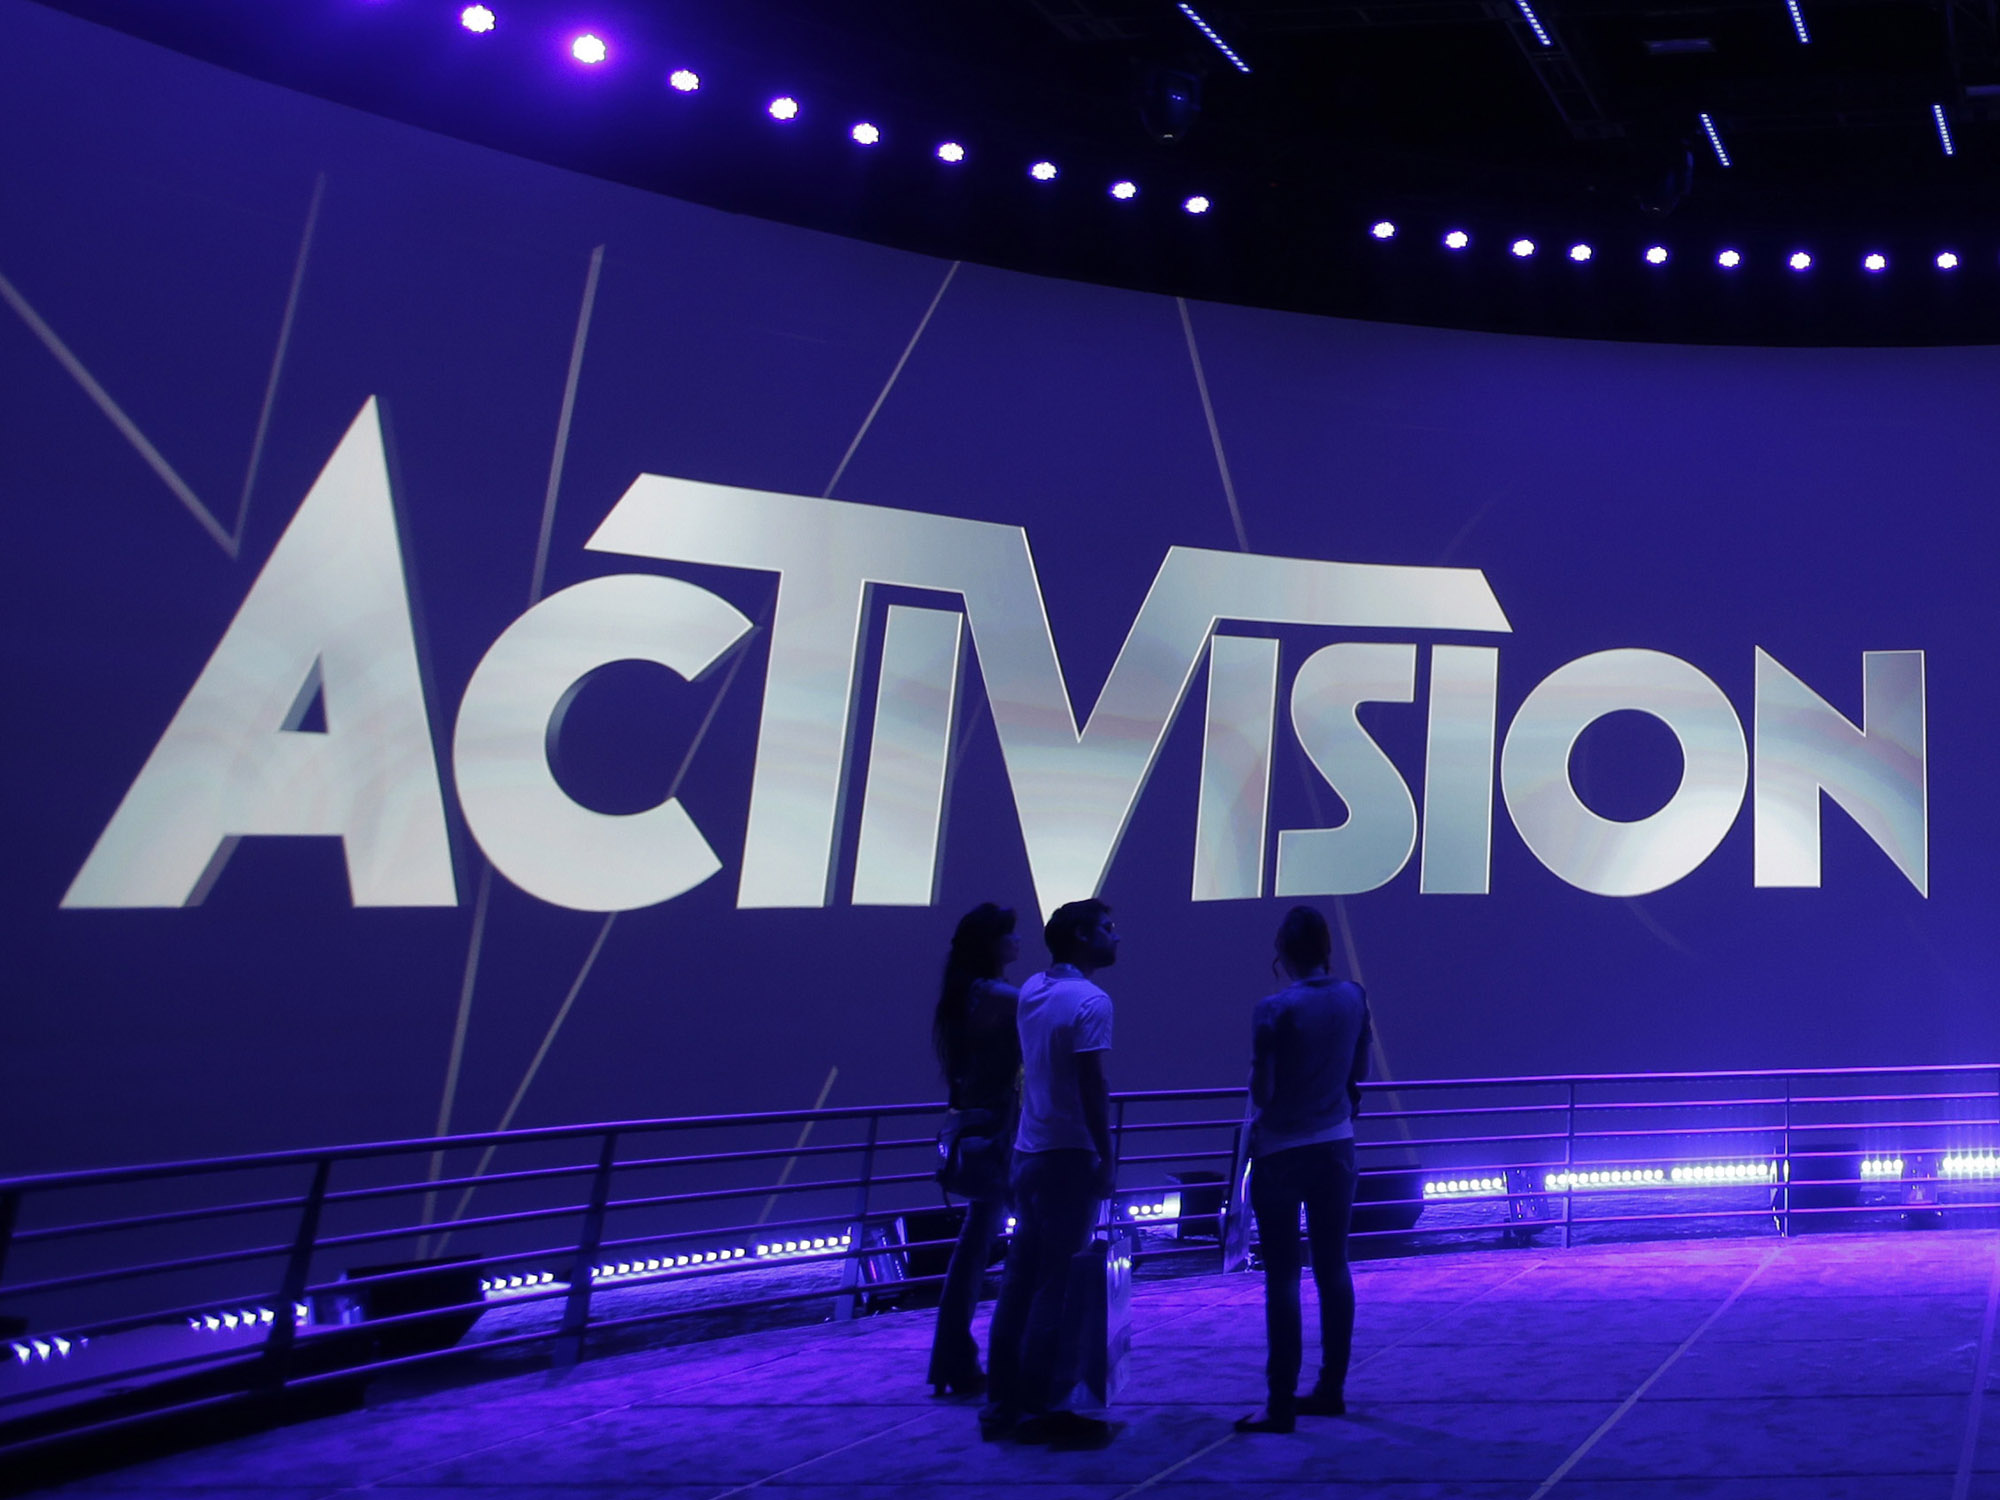 Microsoft Activision Blizzard Timeline: More Obstacles to Resolve